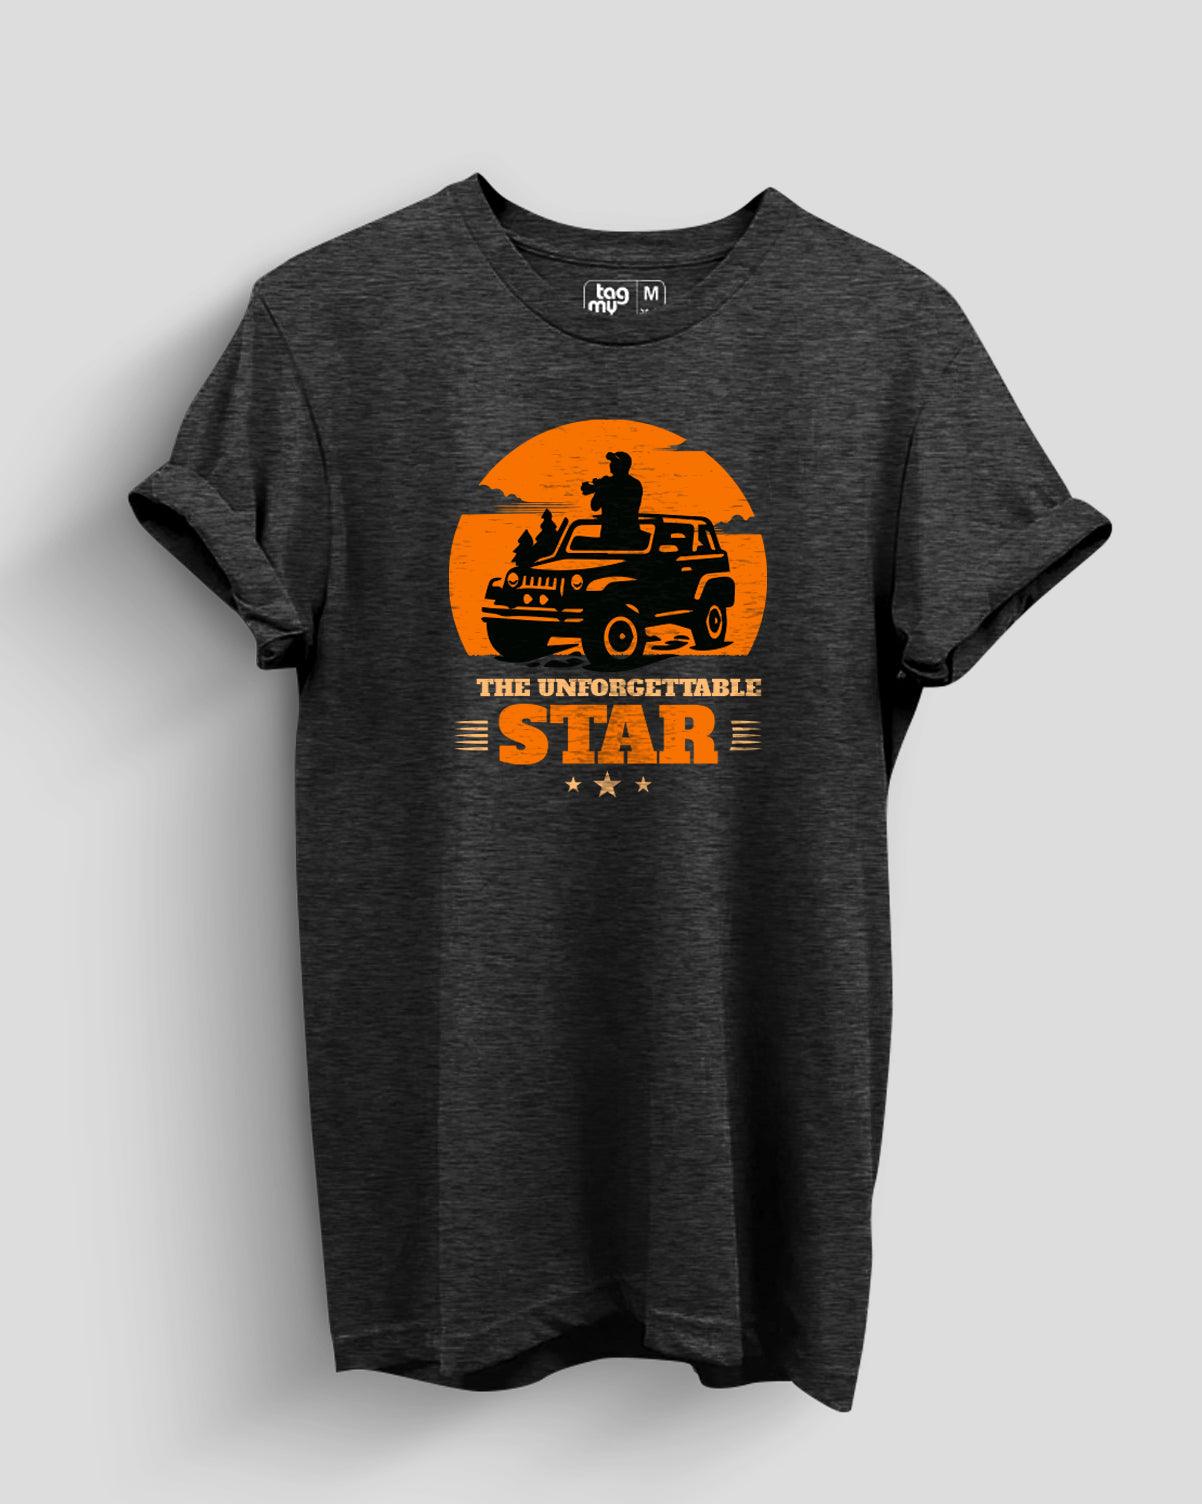 The Unforgettable Star - TagMyTee - Casual T-Shirt